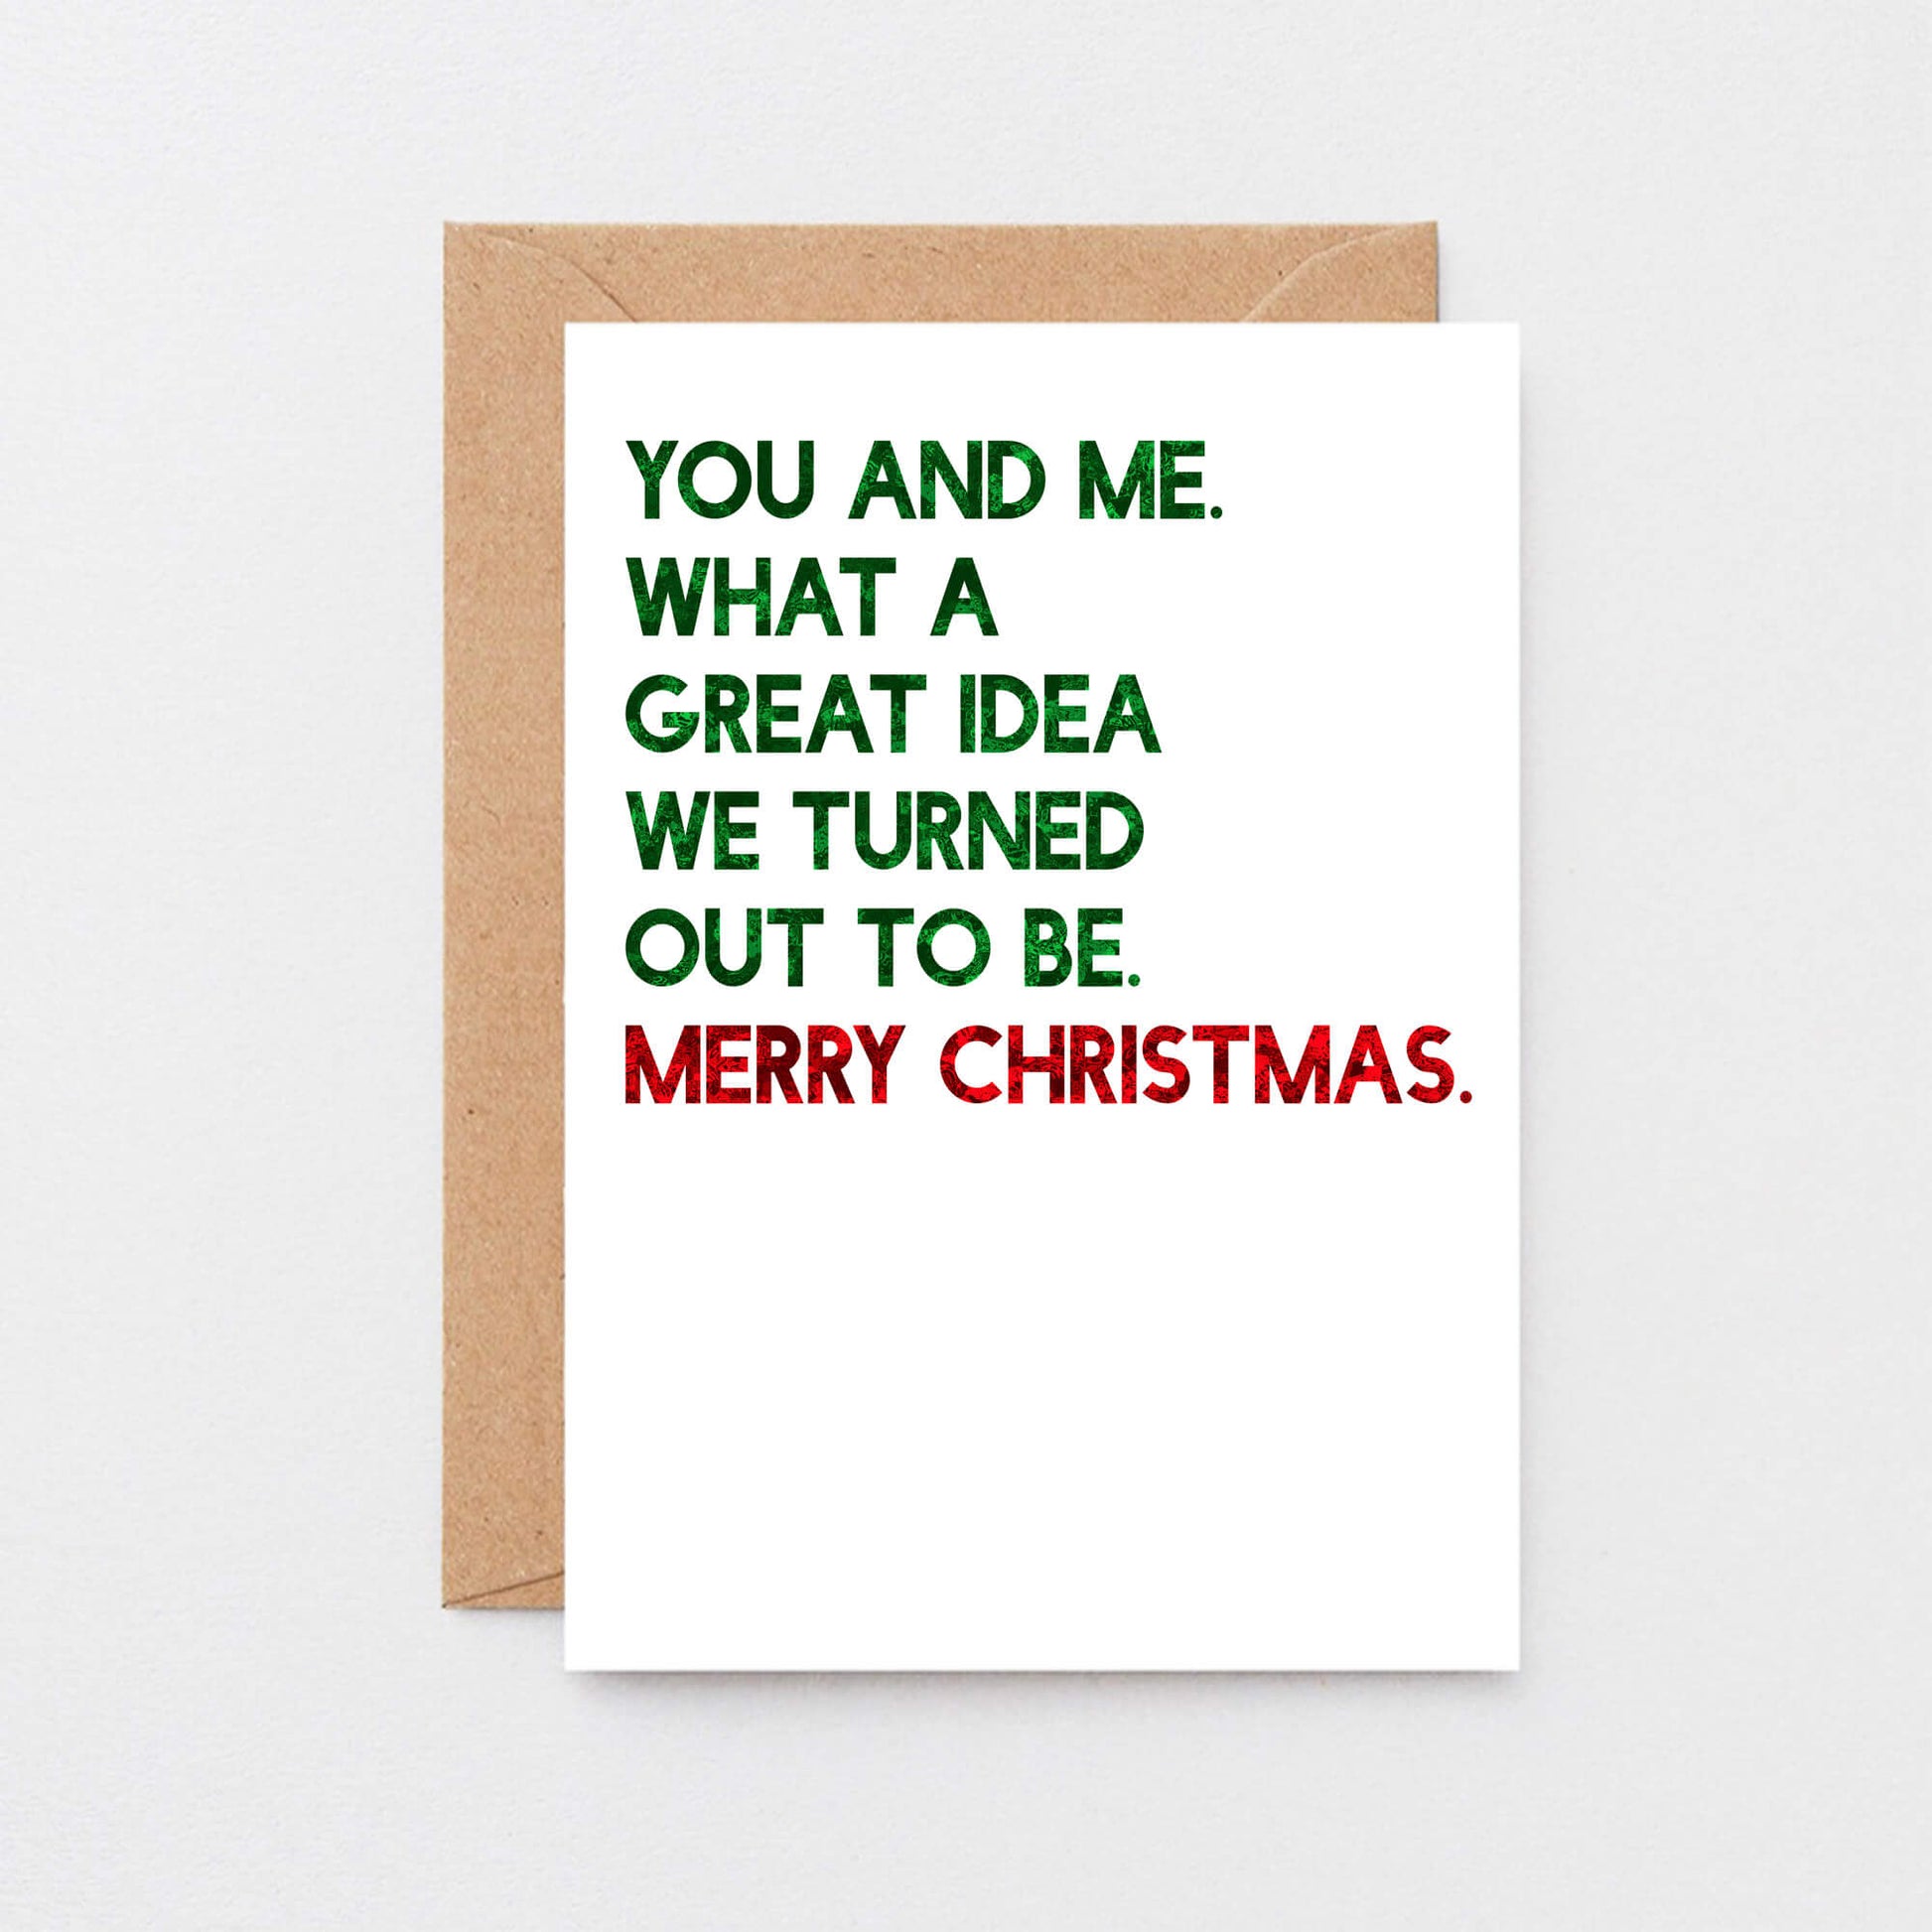 Christmas Card by SixElevenCreations. Reads You and me. What a great idea we turned out to be. Merry Christmas. Product Code SEC0051A6